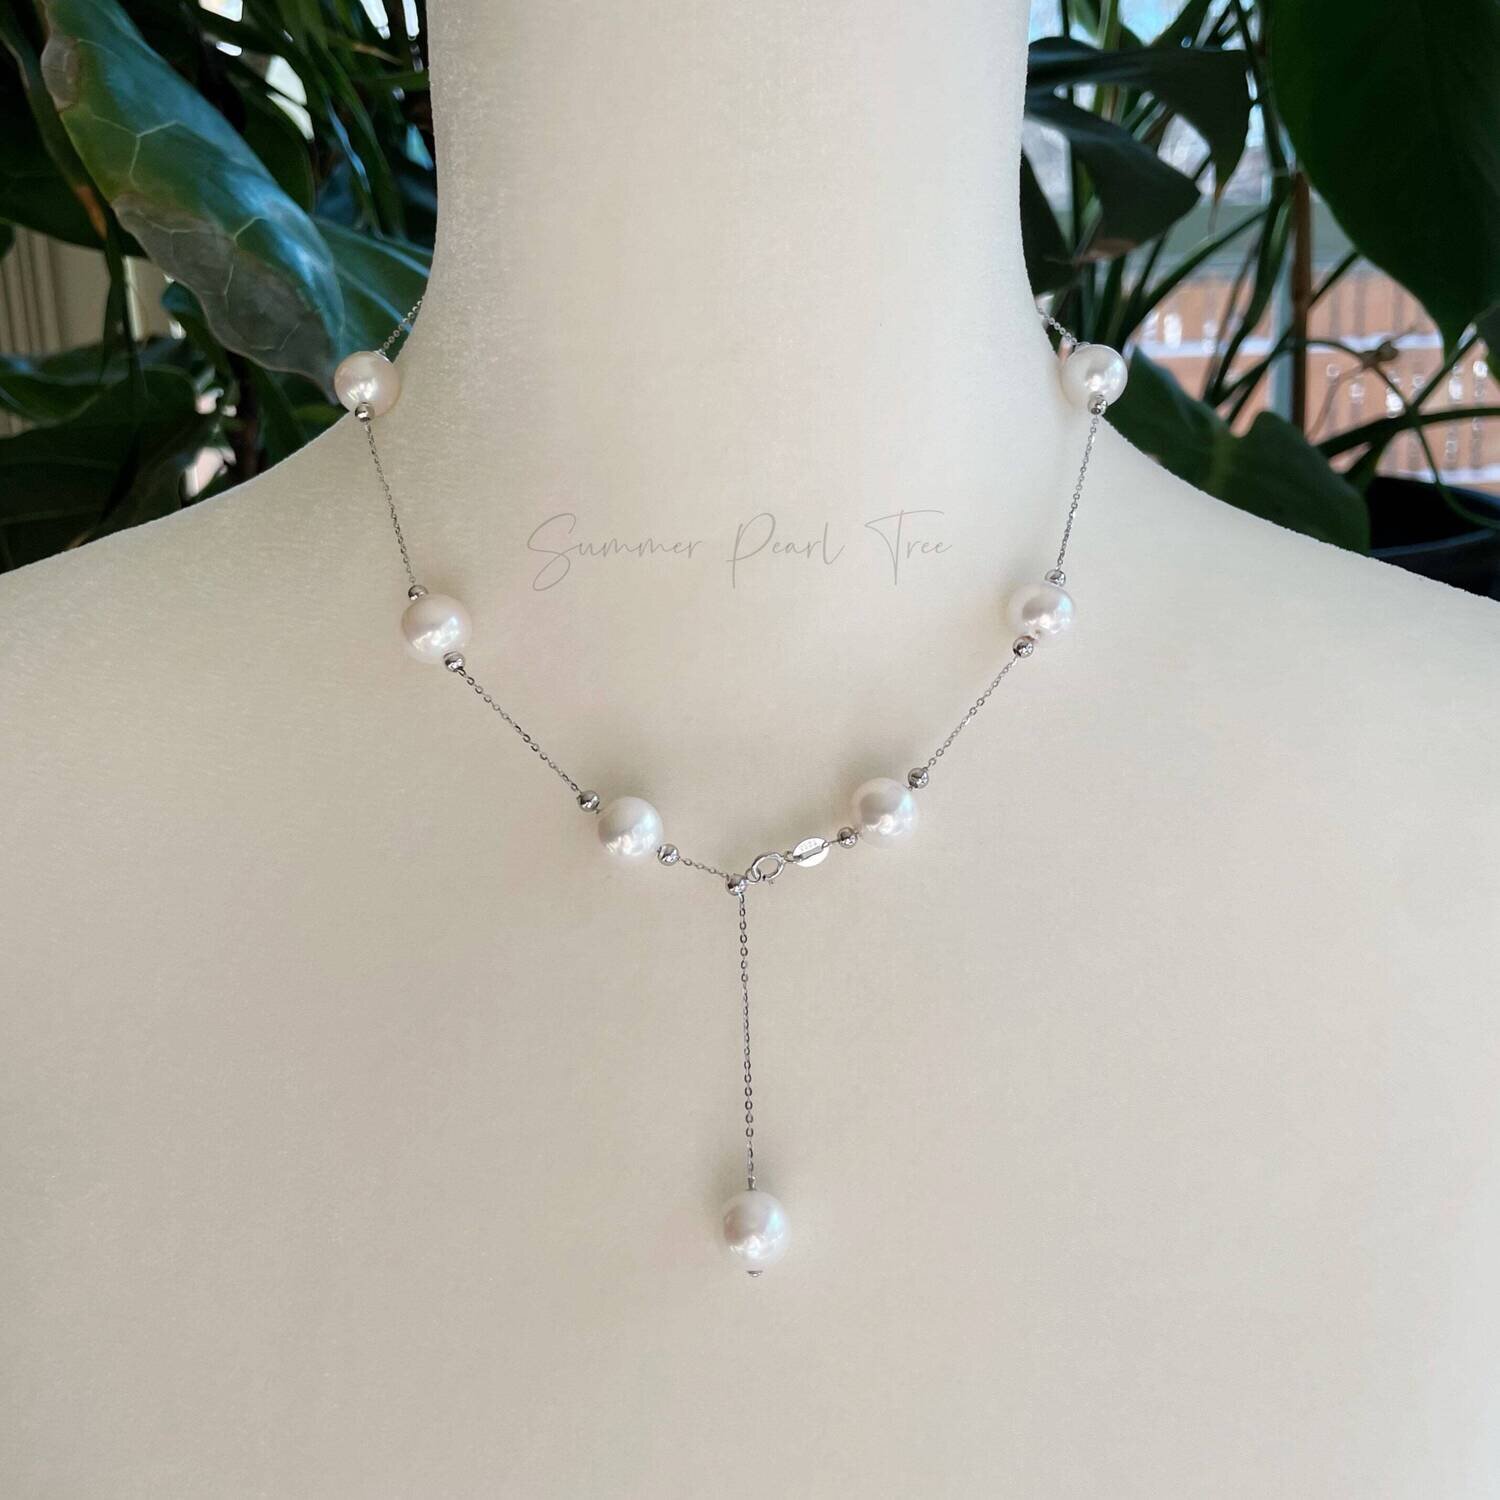 4-in-1 necklace, Multi-wear necklace, Stationed pearl necklace, gift for her, wedding necklace, bridal necklace, freshwater pearl necklace